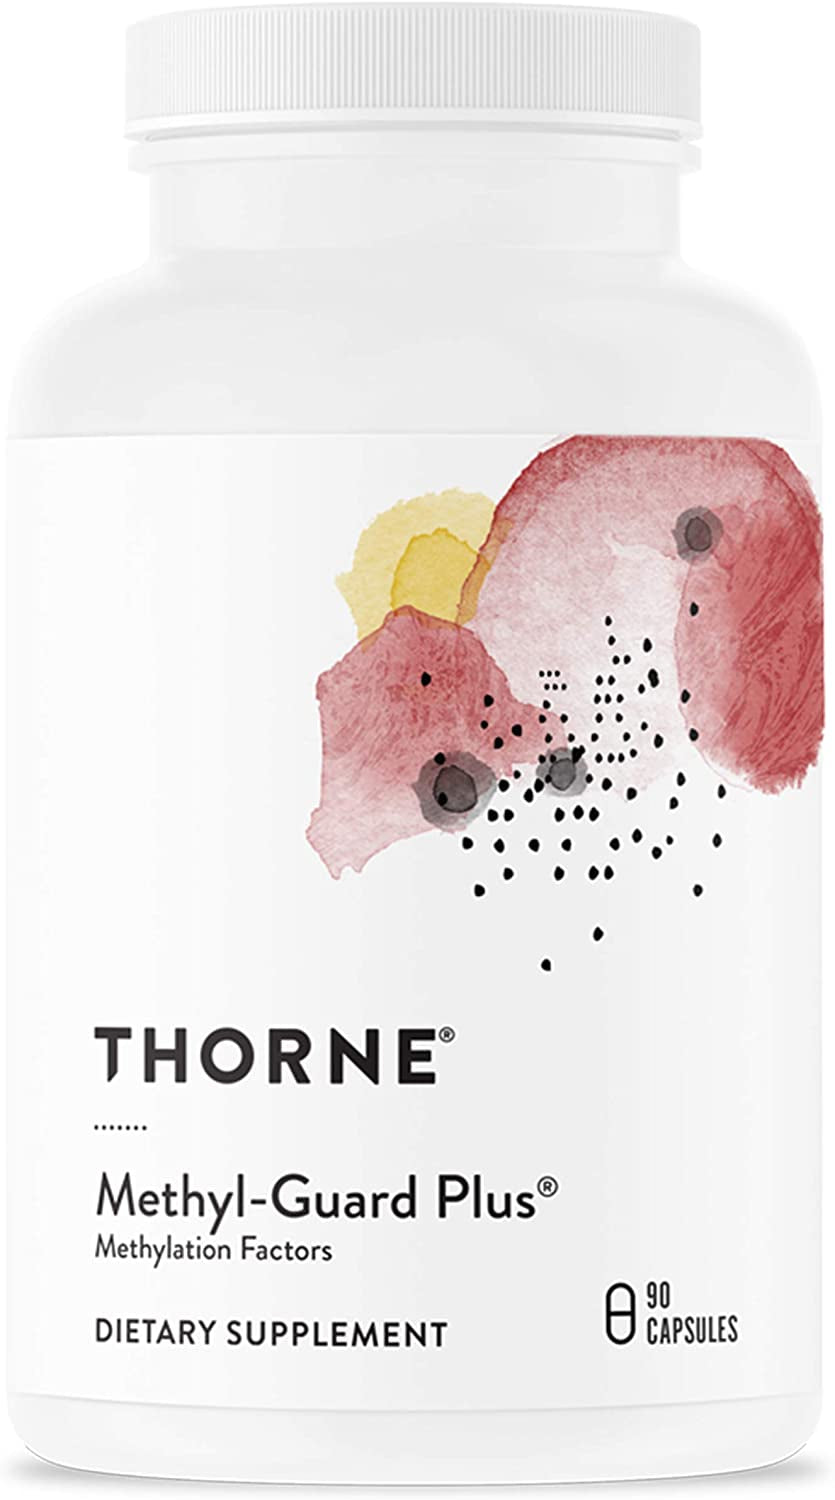 Thorne Methyl-Guard plus - Active Folate (5-MTHF) with Vitamins B2, B6, and B12 - Supports Methylation and Healthy Level of Homocysteine - Gluten-Free, Dairy-Free, Soy-Free - 90 Capsules